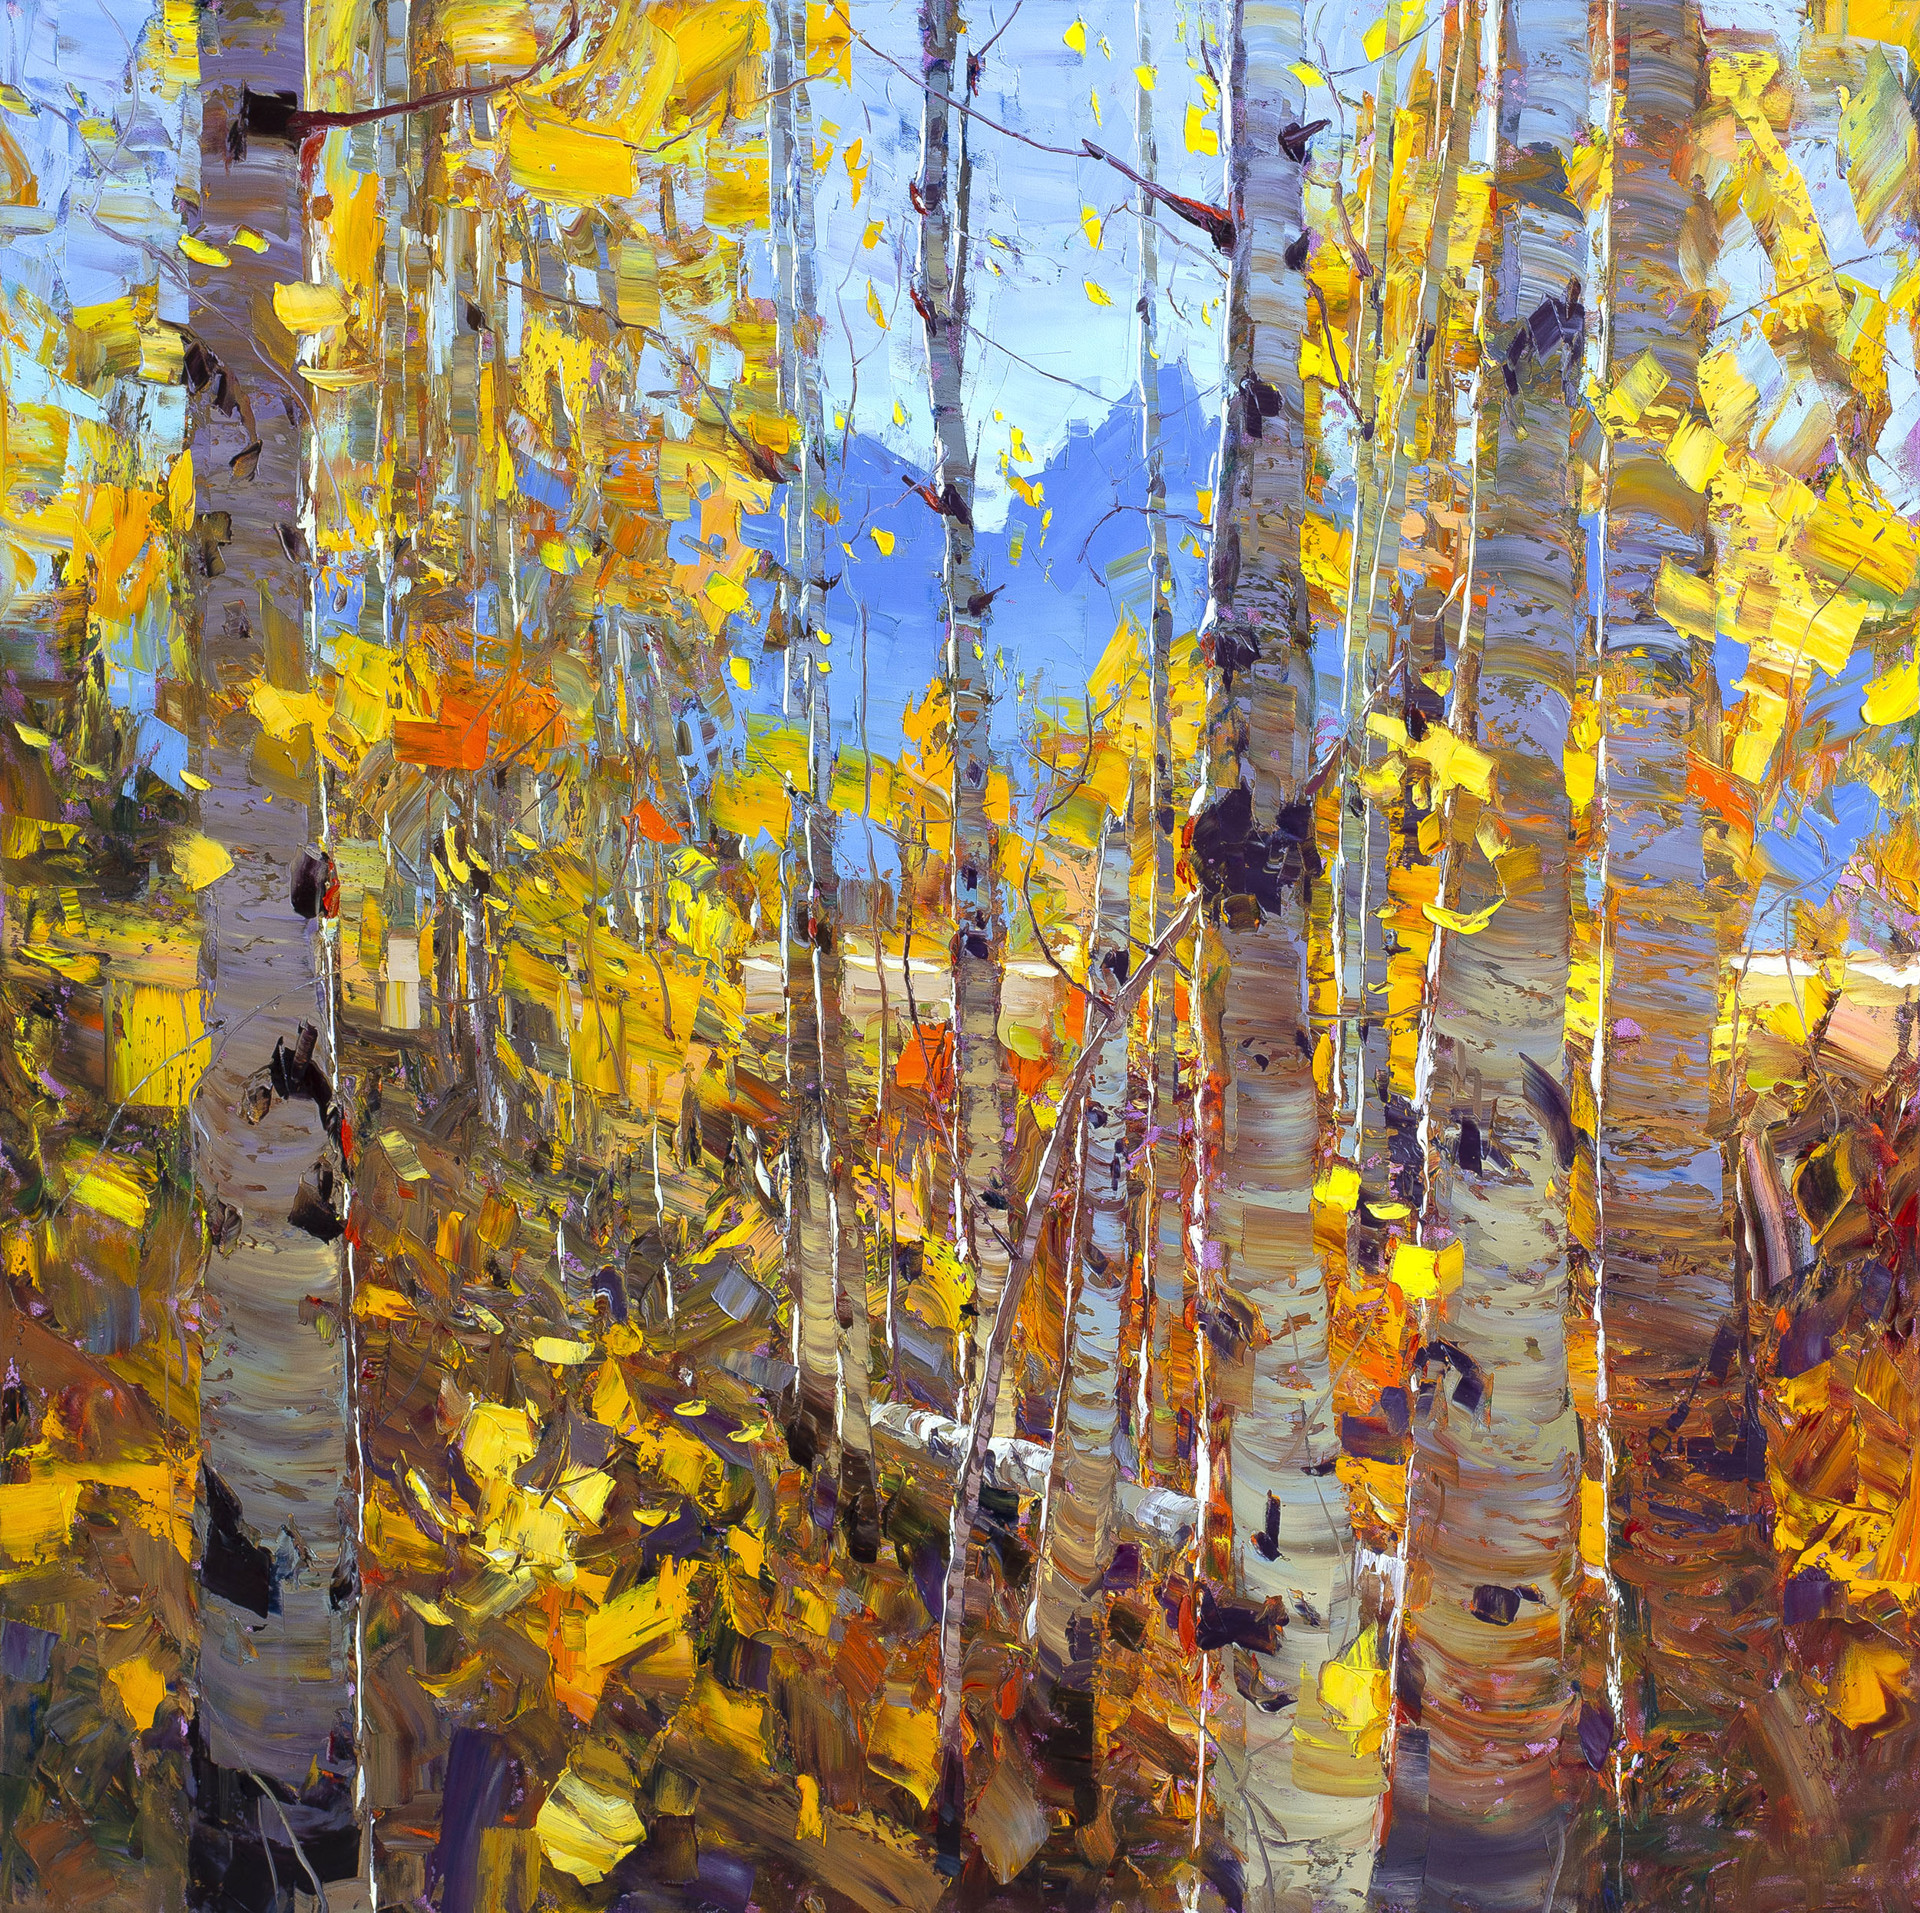 Original Oil Landscape Painting Featuring Blue Mountains Seen Through Yellow Foliage And White Tree Trunks